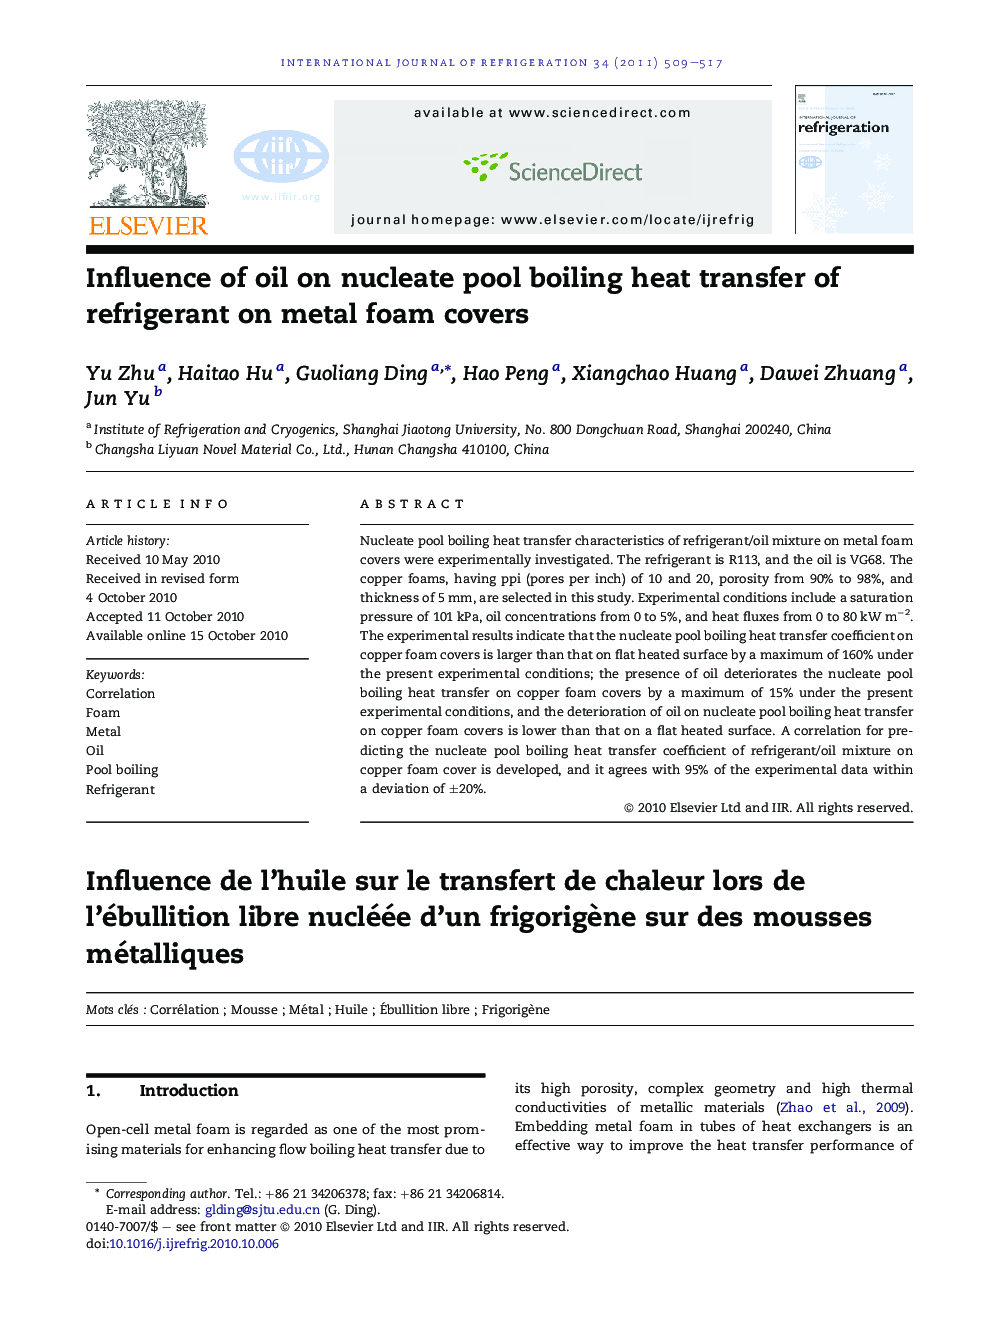 Influence of oil on nucleate pool boiling heat transfer of refrigerant on metal foam covers